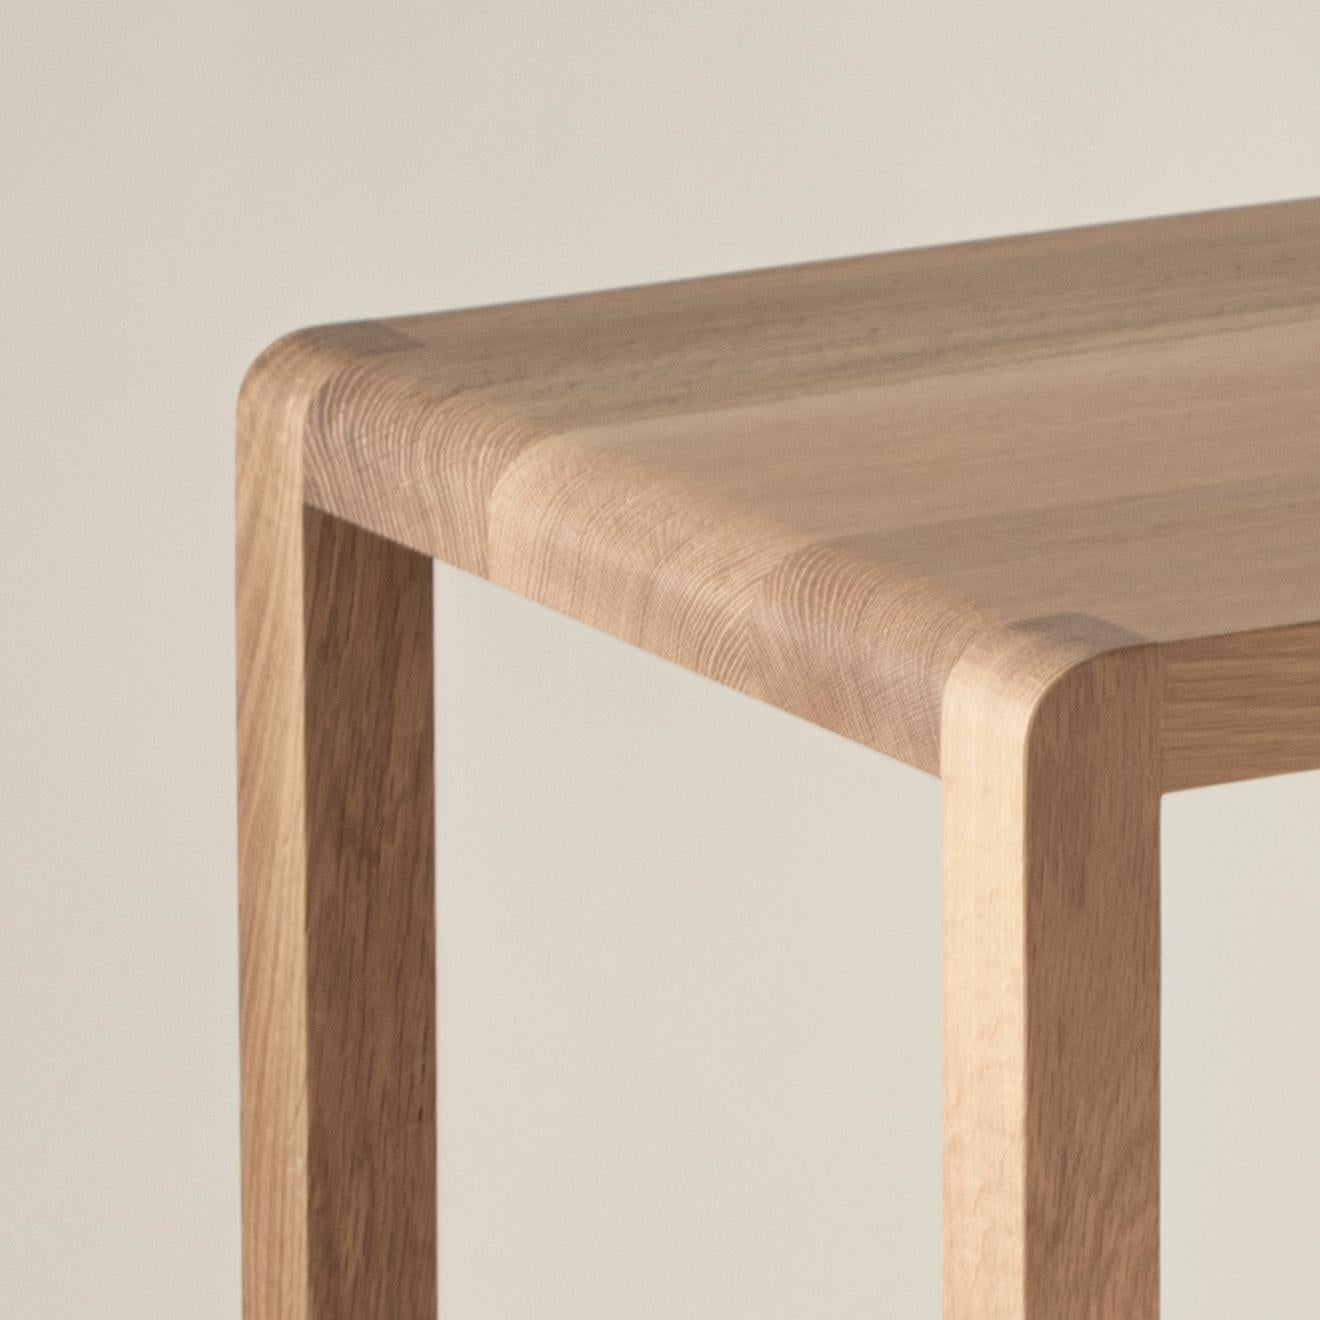 The Box Stool is a bespoke solid wood kitchen stool that we will manufacture to your precise seat height. We receive a steady stream of requests for custom-height stools, and BOX: STOOL is designed to work in harmony with the OnOurTable Cook Island.